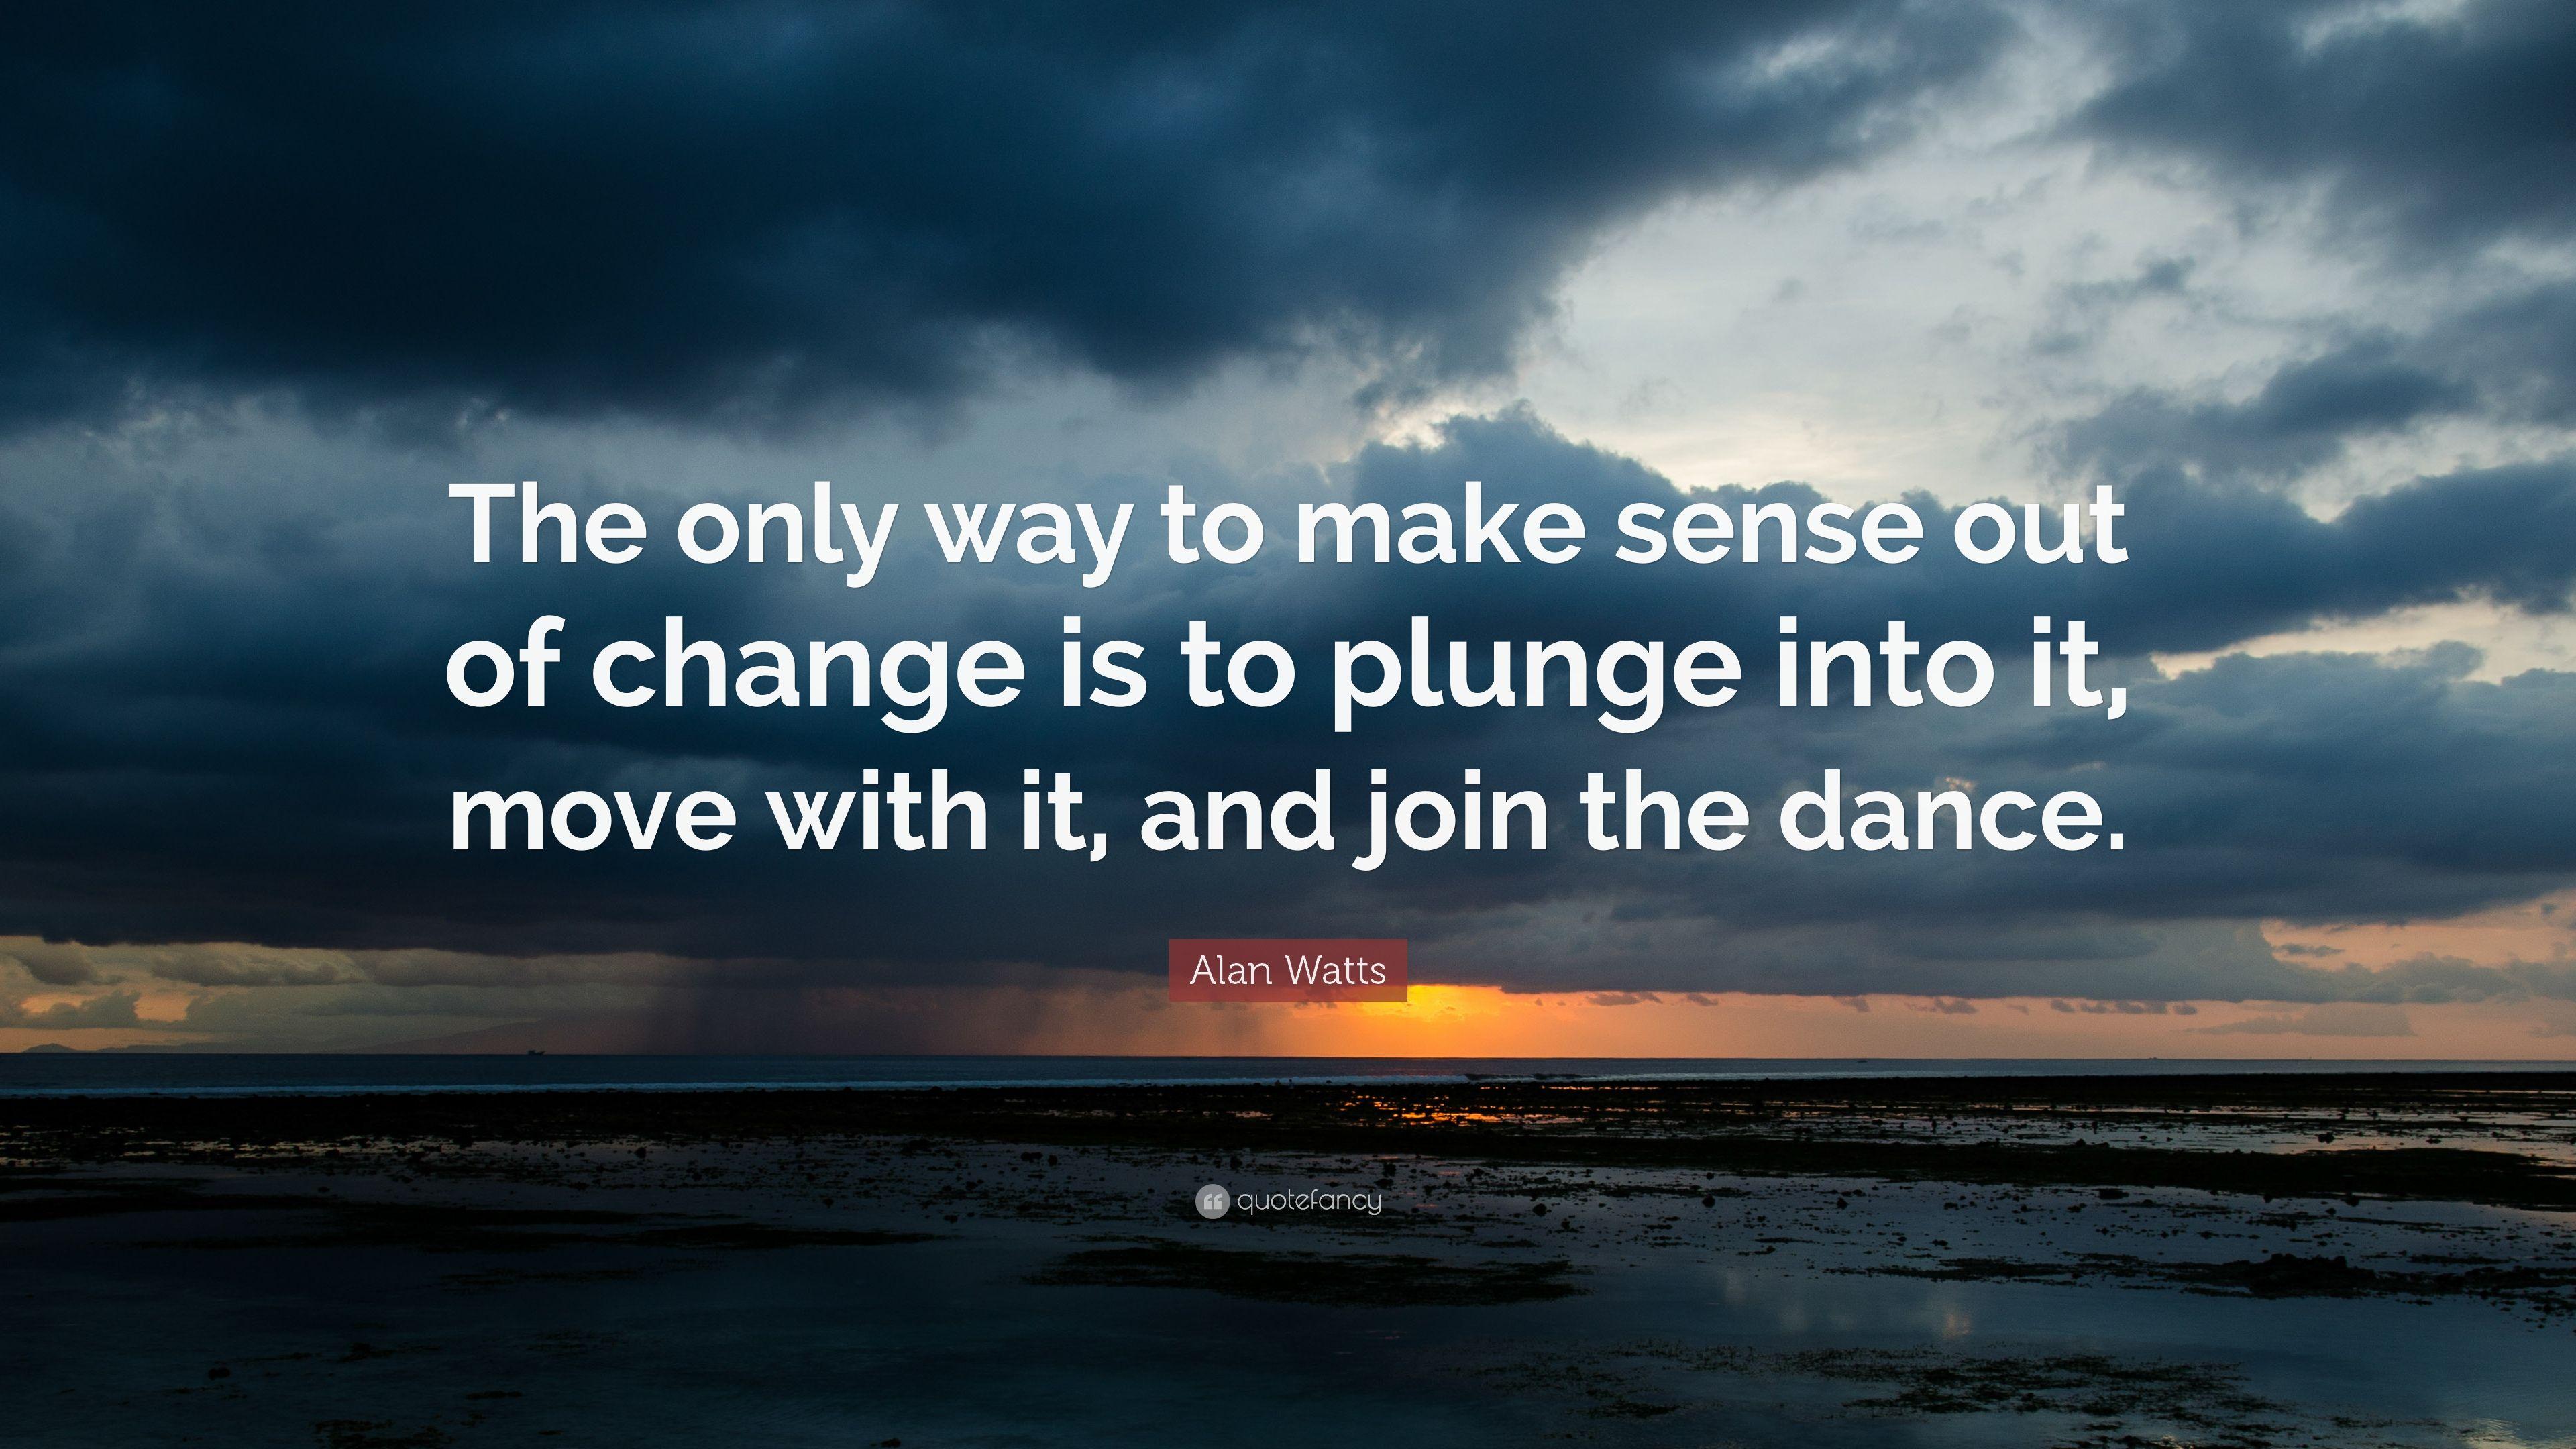 Alan Watts Quote: "The only way to make sense out of change is to.